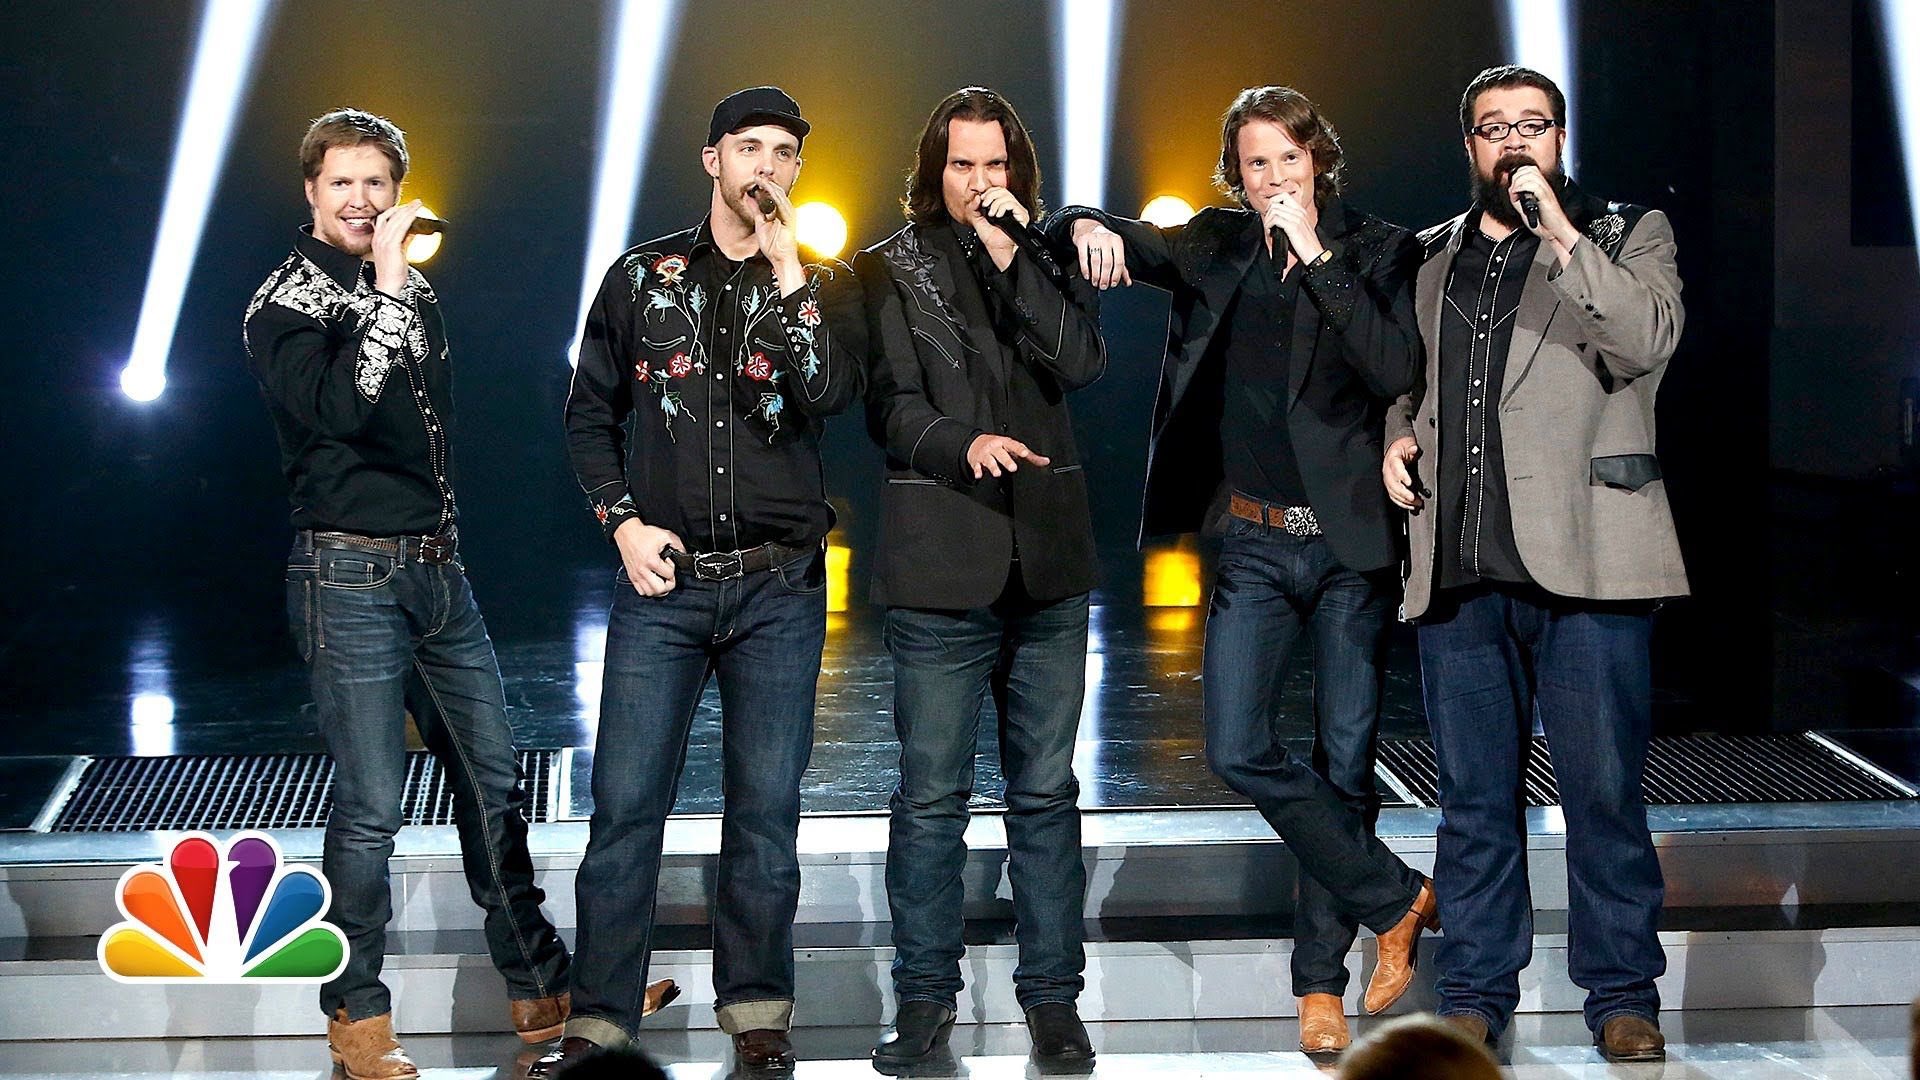 Home Free brings the Heat to Charotte | Shutter 16 Magazine